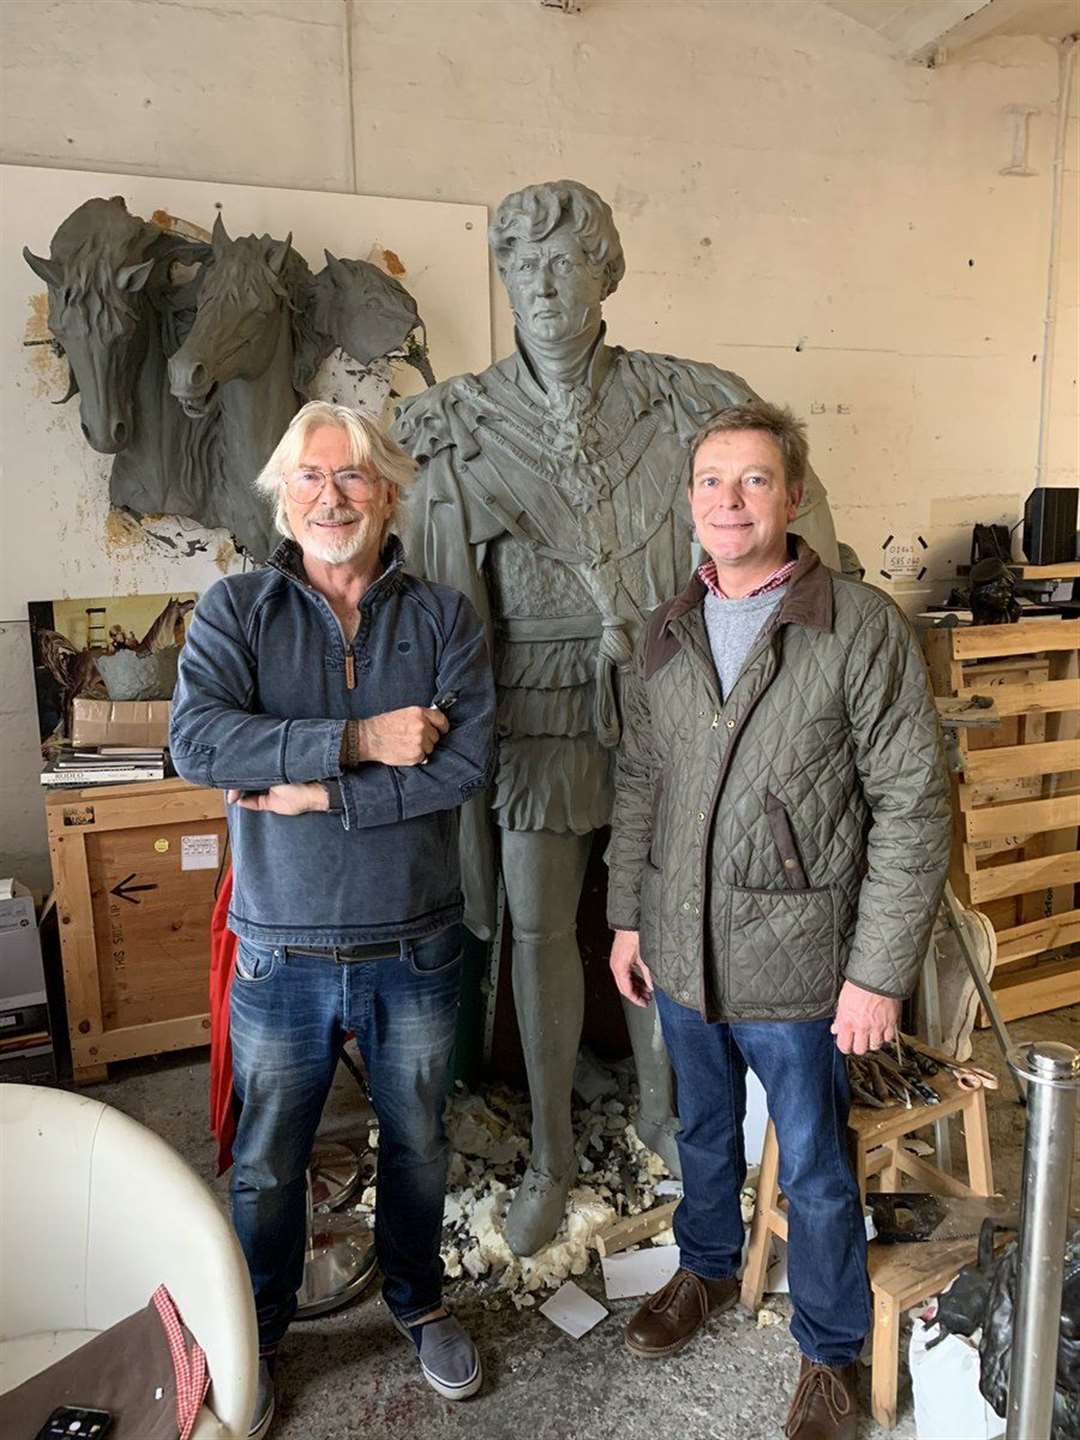 Dominic Grant giving MP Craig Mackinlay a preview of his sculpture of George IV